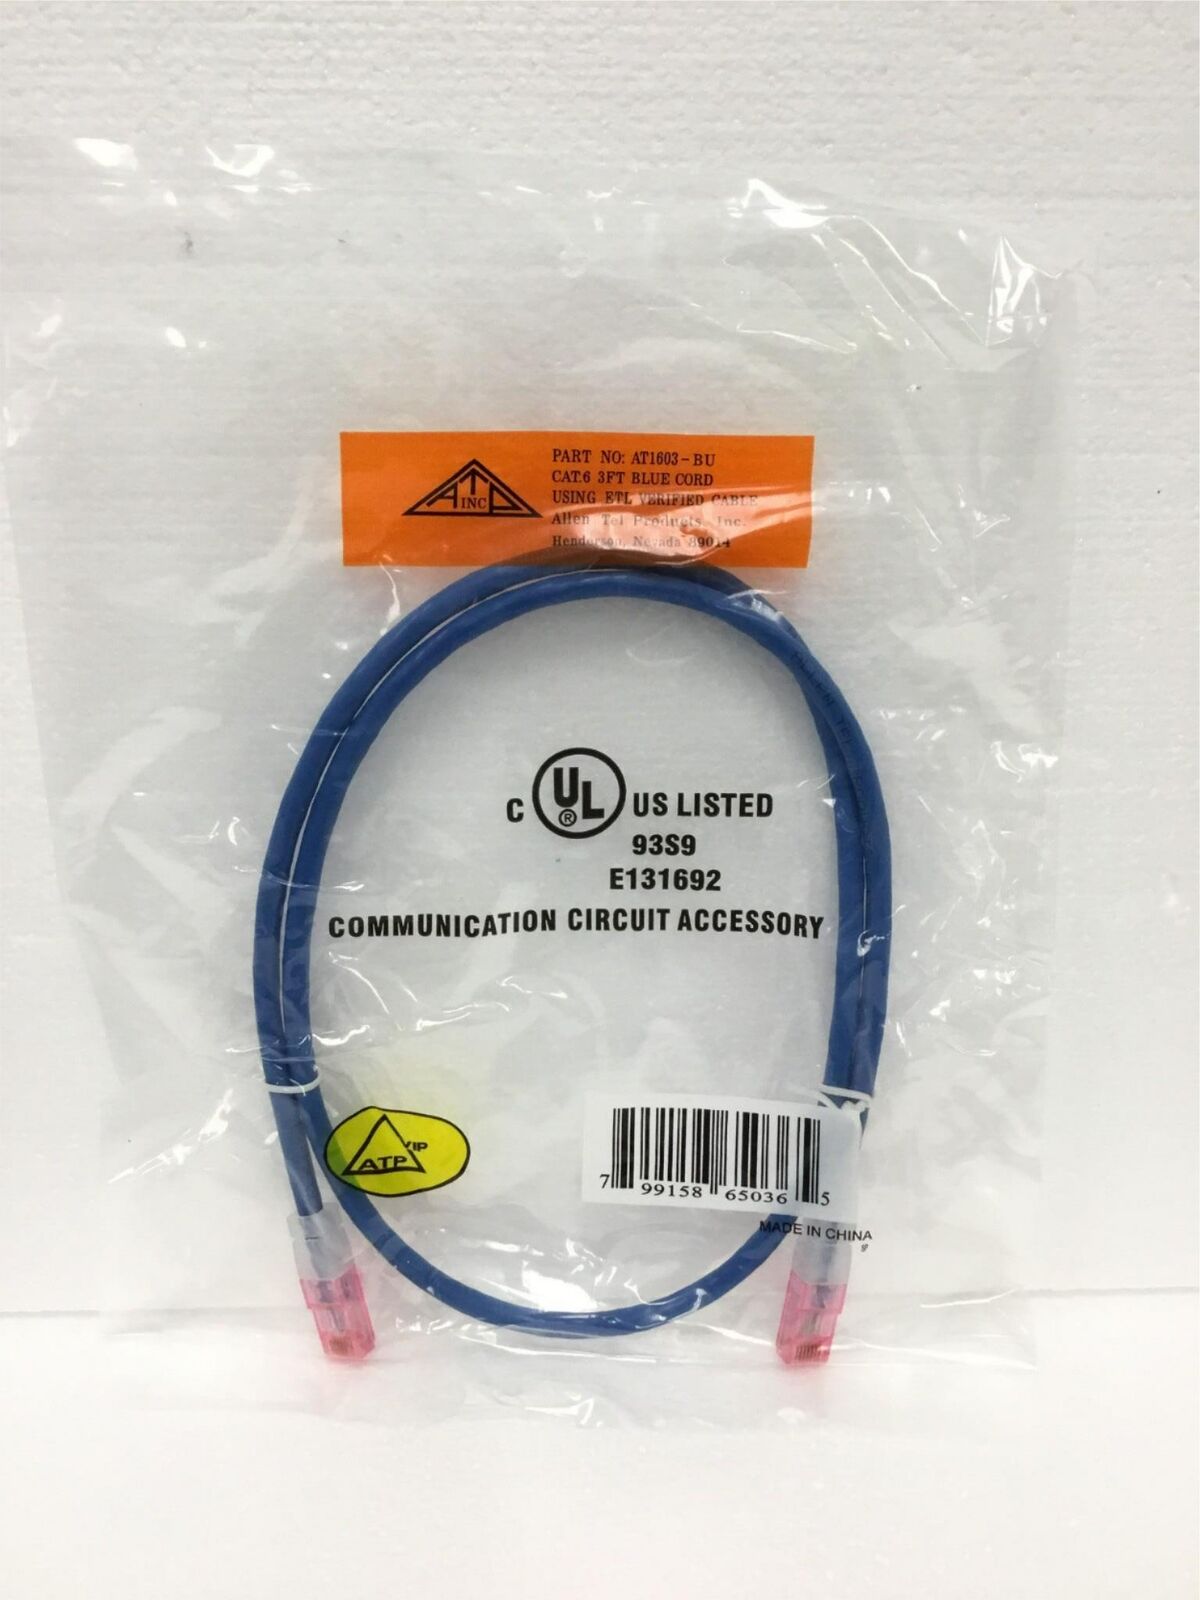 50x NEW ATP AT1603-BU 3Ft Blue Cable Communication Circuit Accessory FreeShip